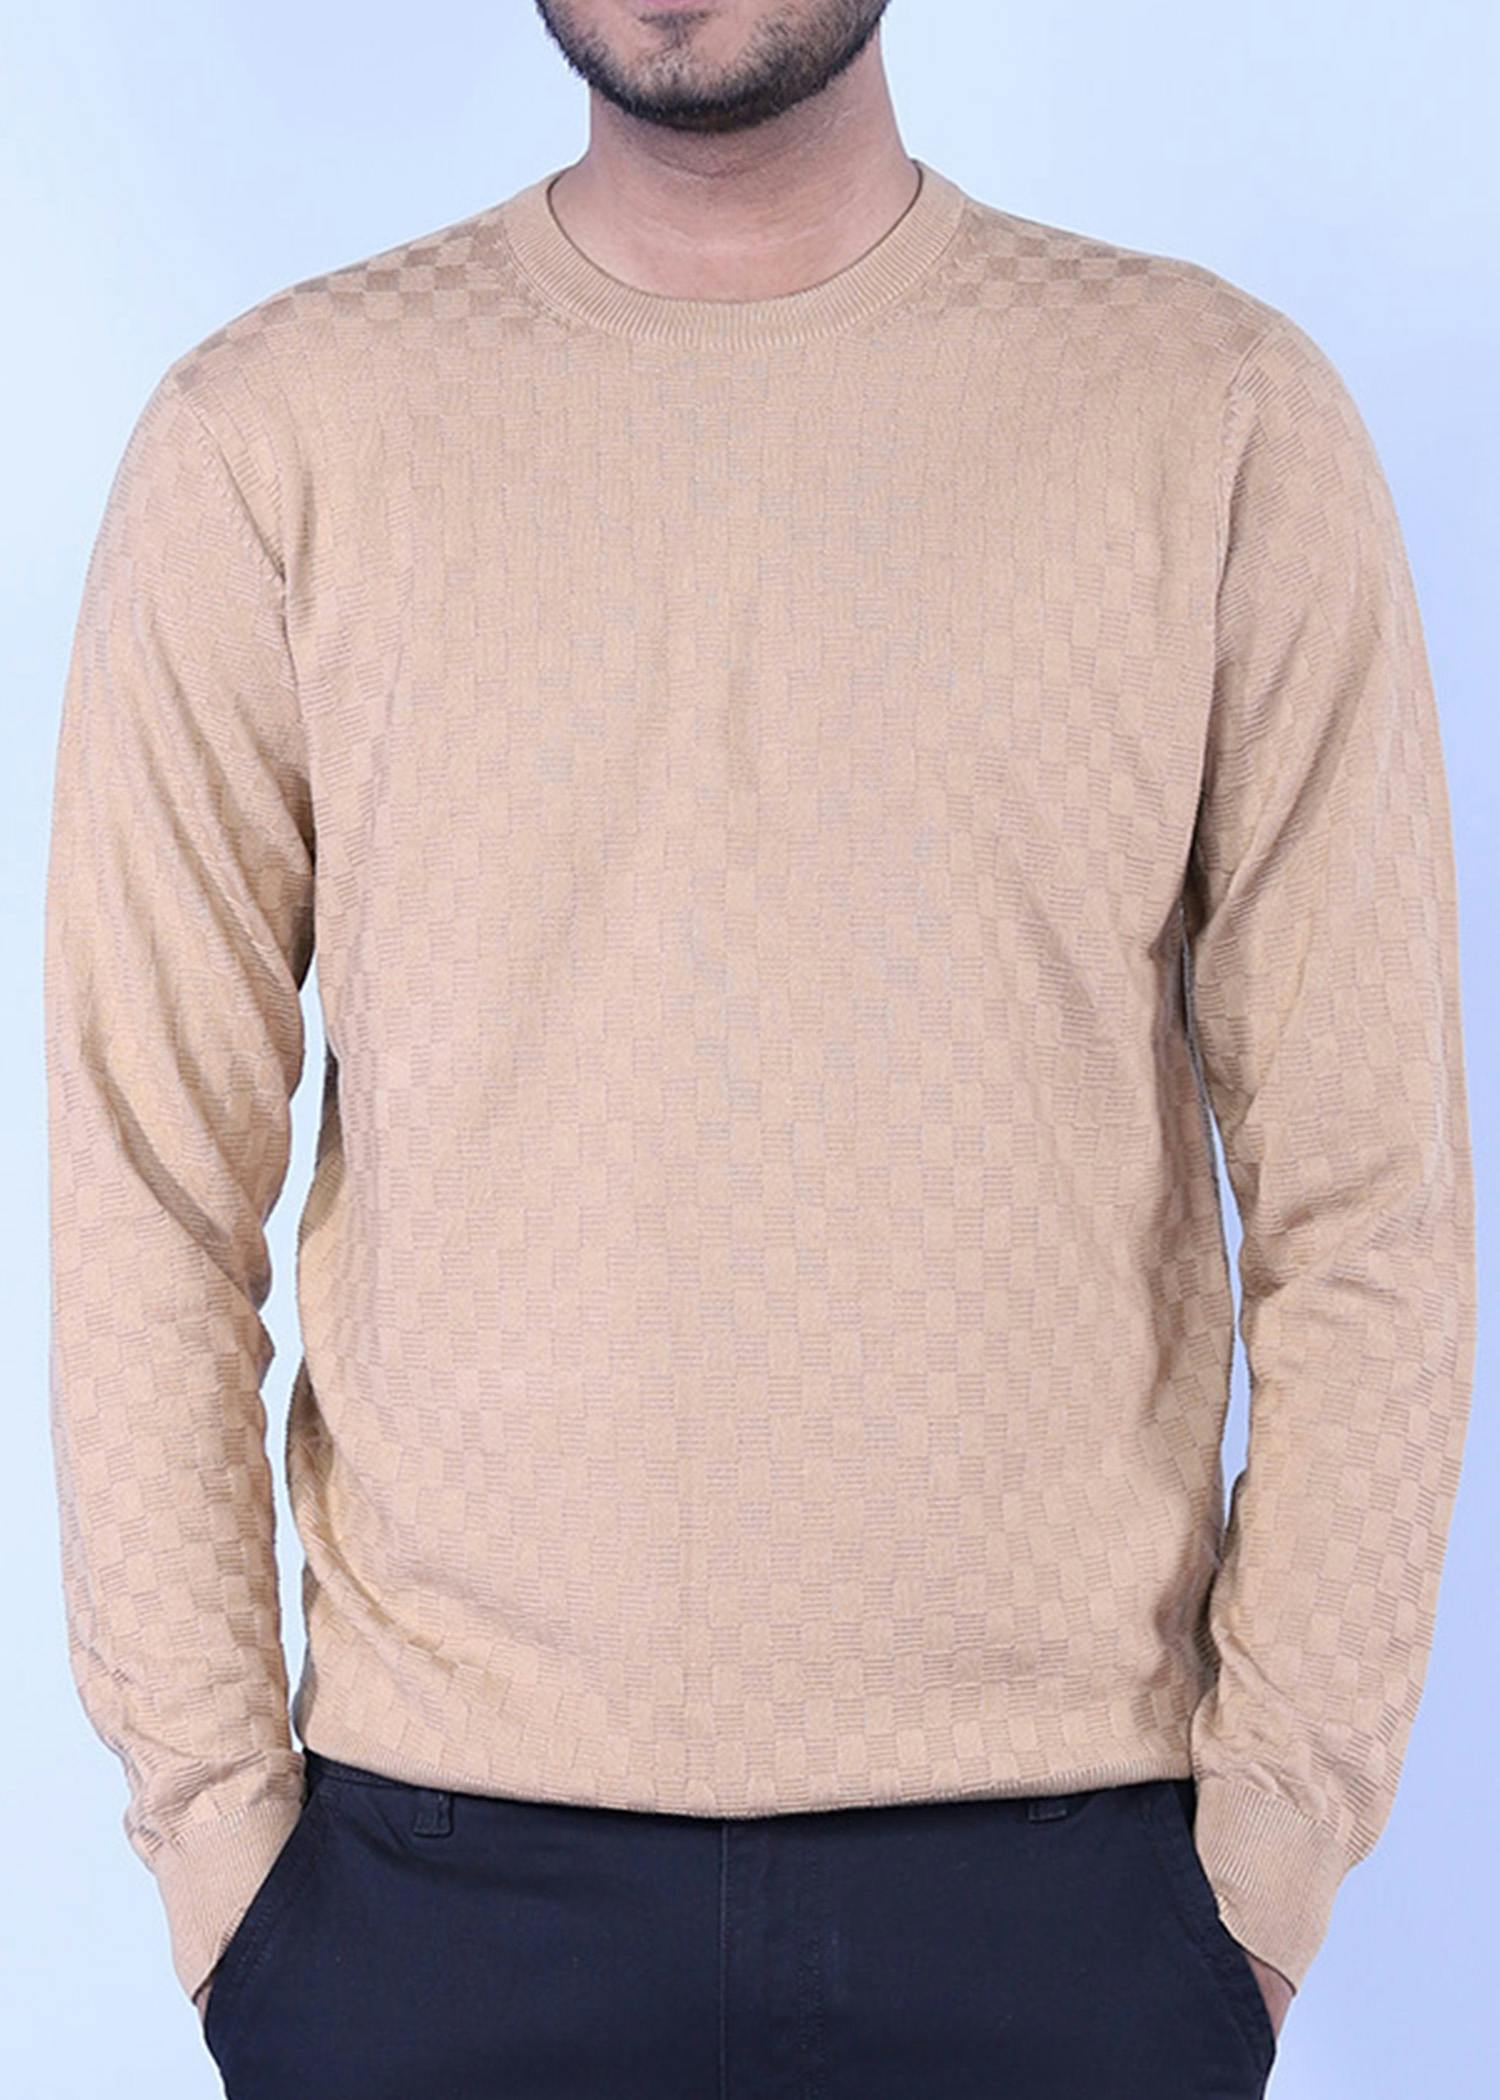 hillstar vii sweater camel color head cropped